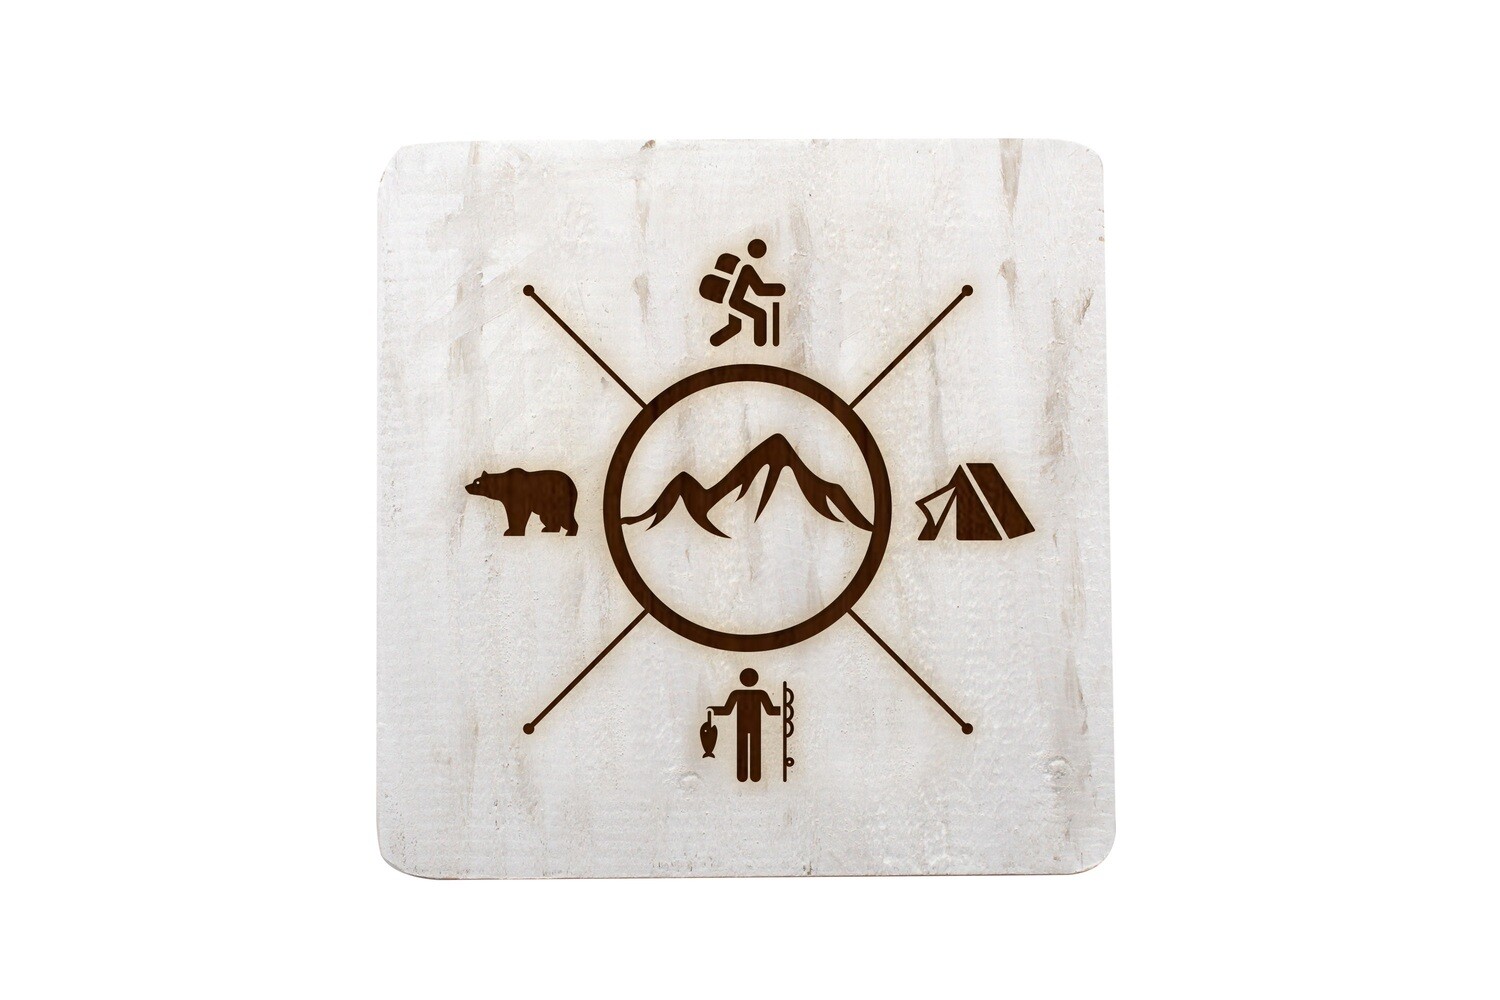 Mountains with 4 Outdoor Themes Hand-Painted Wood Coaster Set